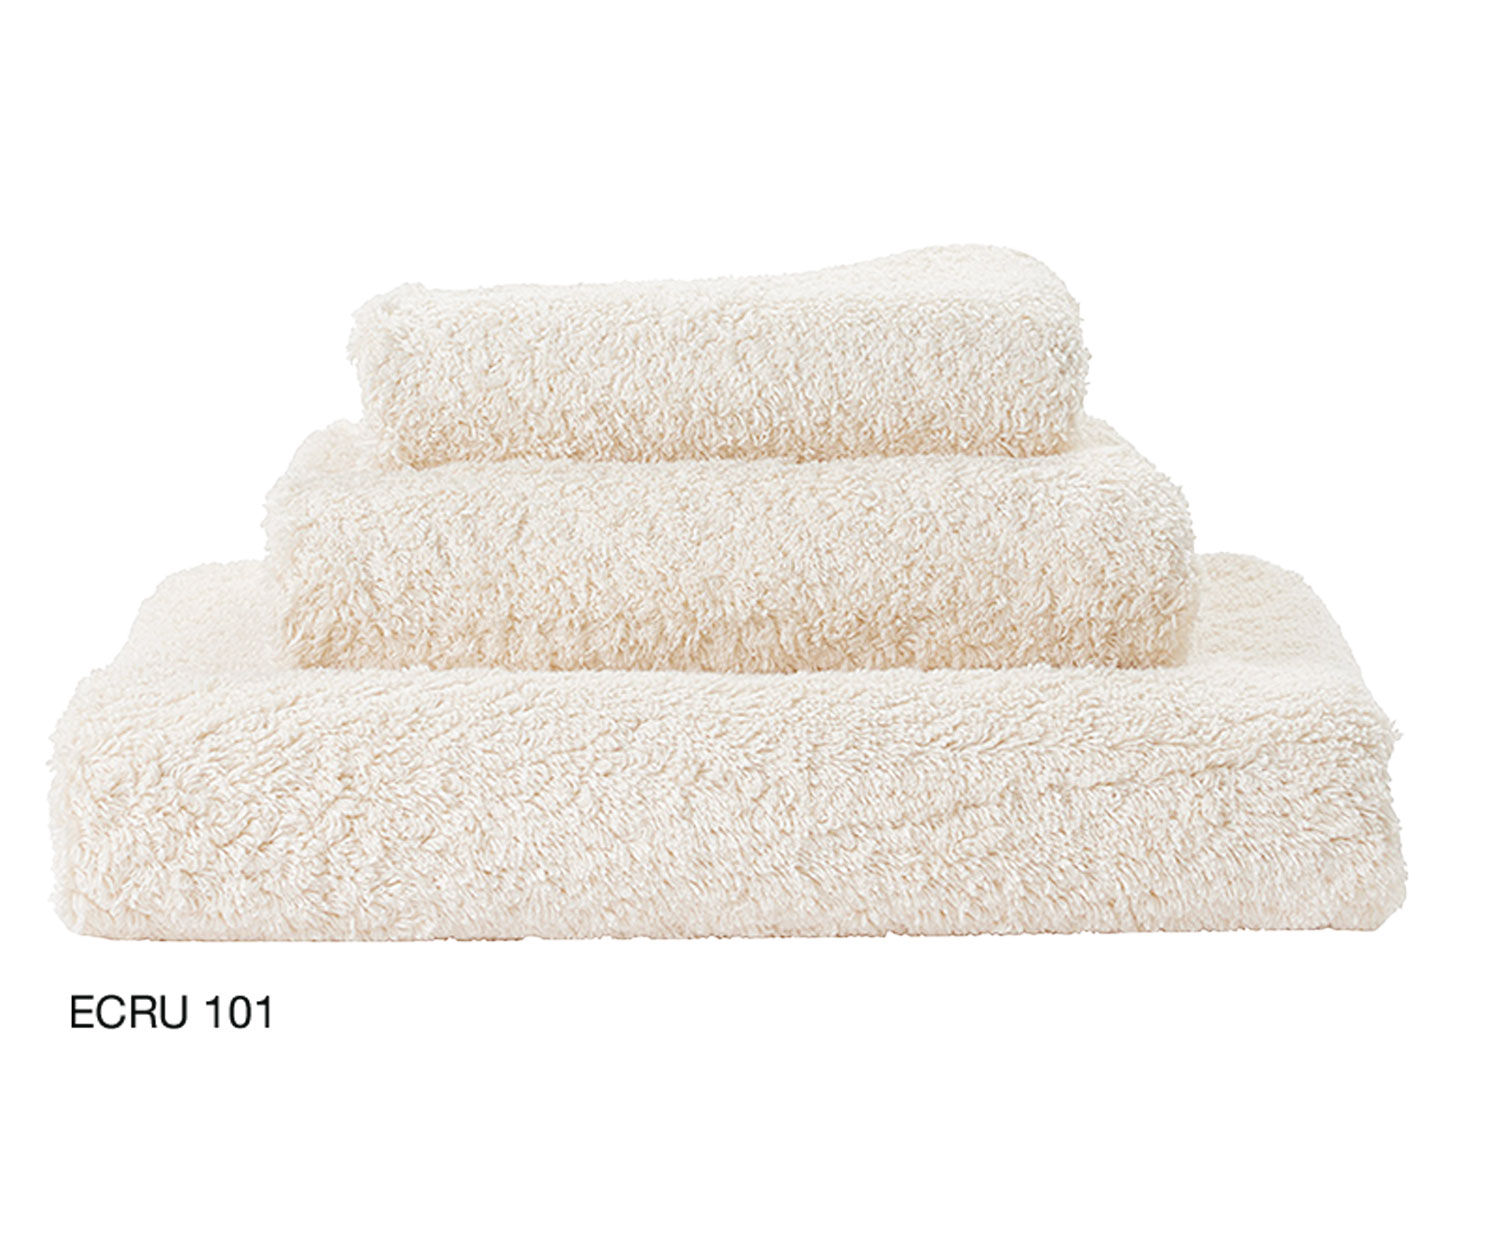 Abyss Super Pile Bath Towels and Mats - Happy Pink (570)